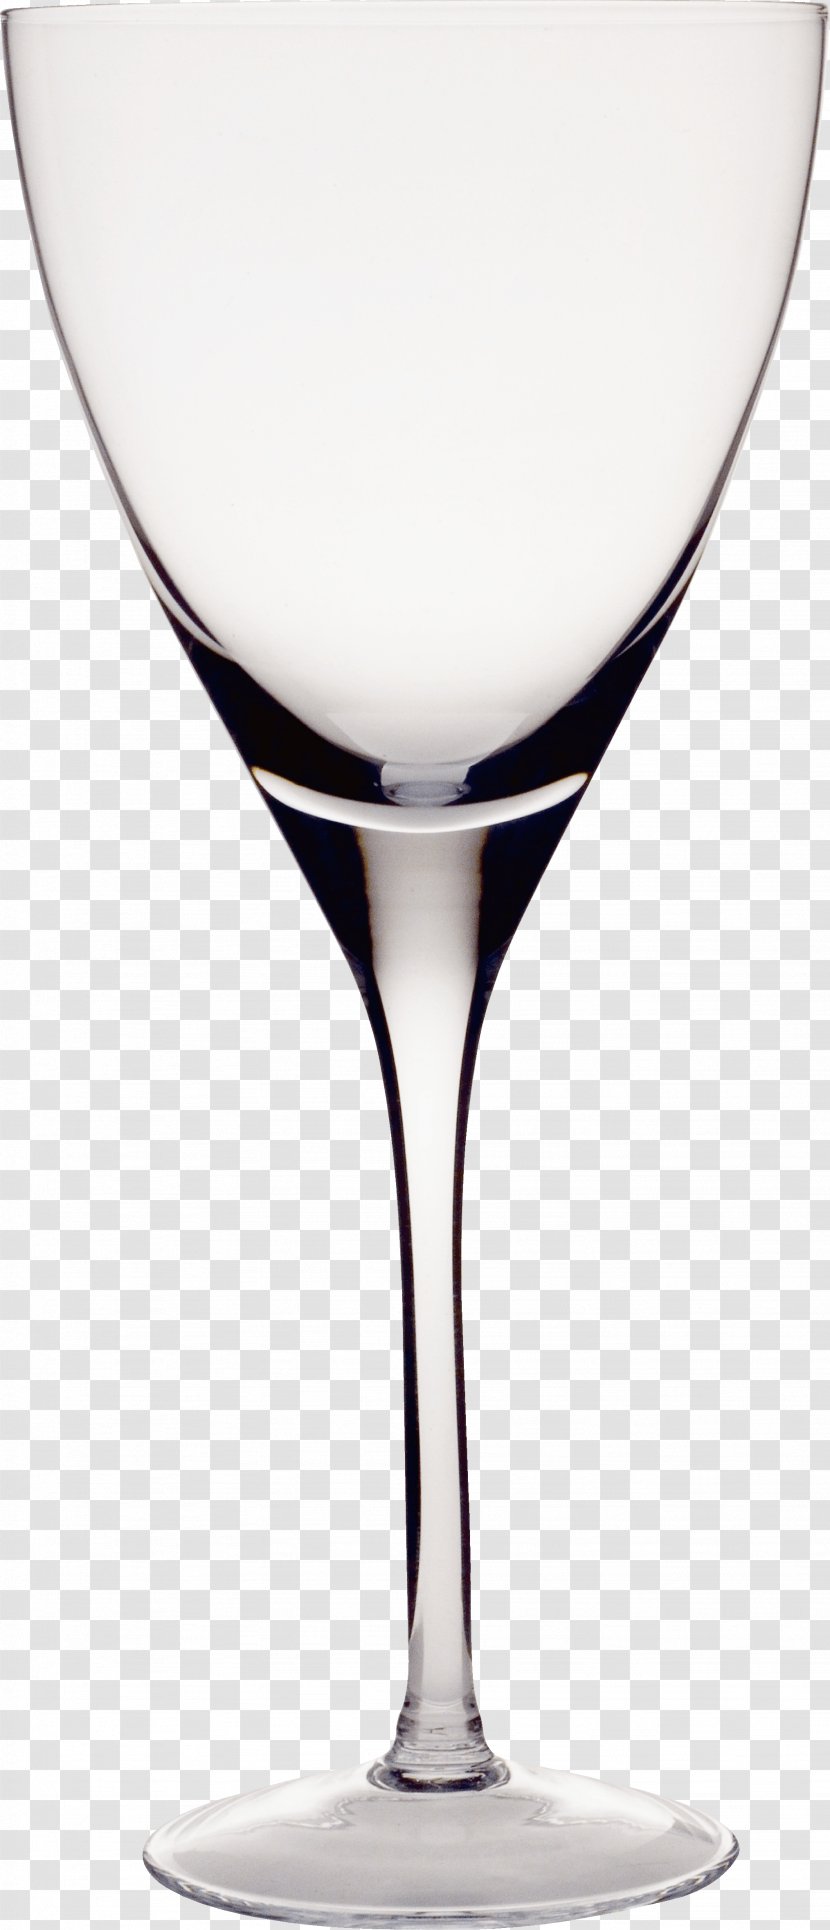 Wine Glass Champagne Tableware - Image Transparent PNG